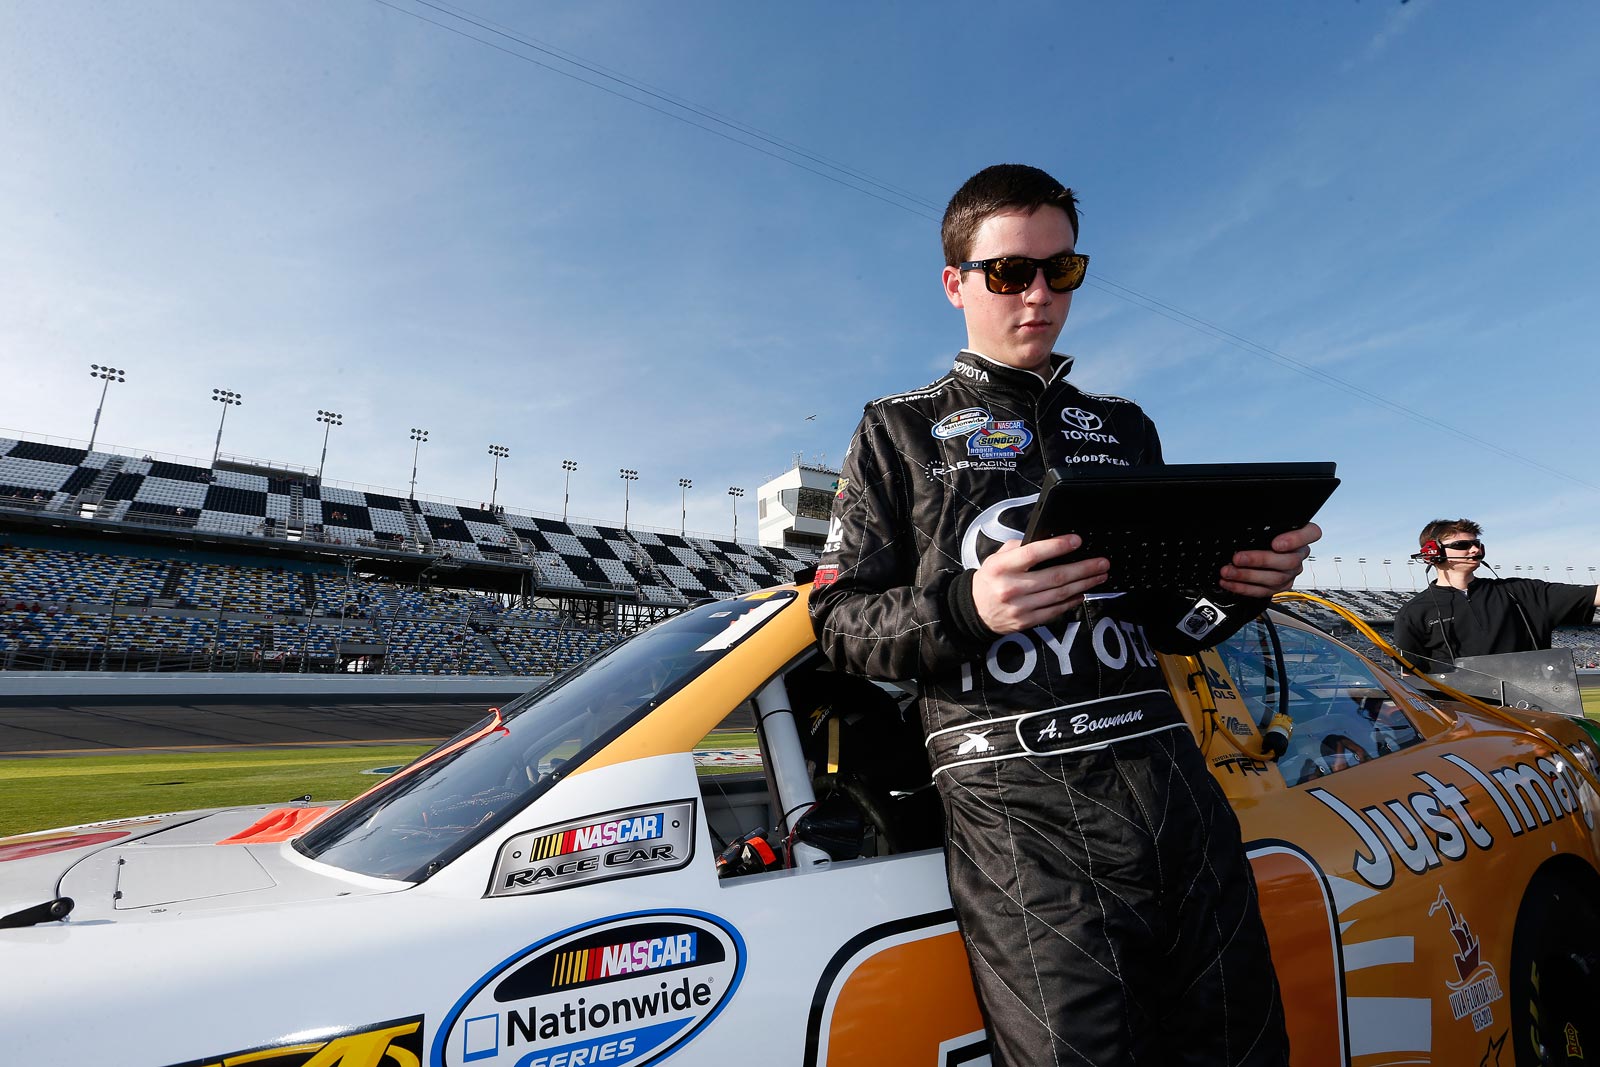 alex-bowman-track-results-on-Surface-Pro